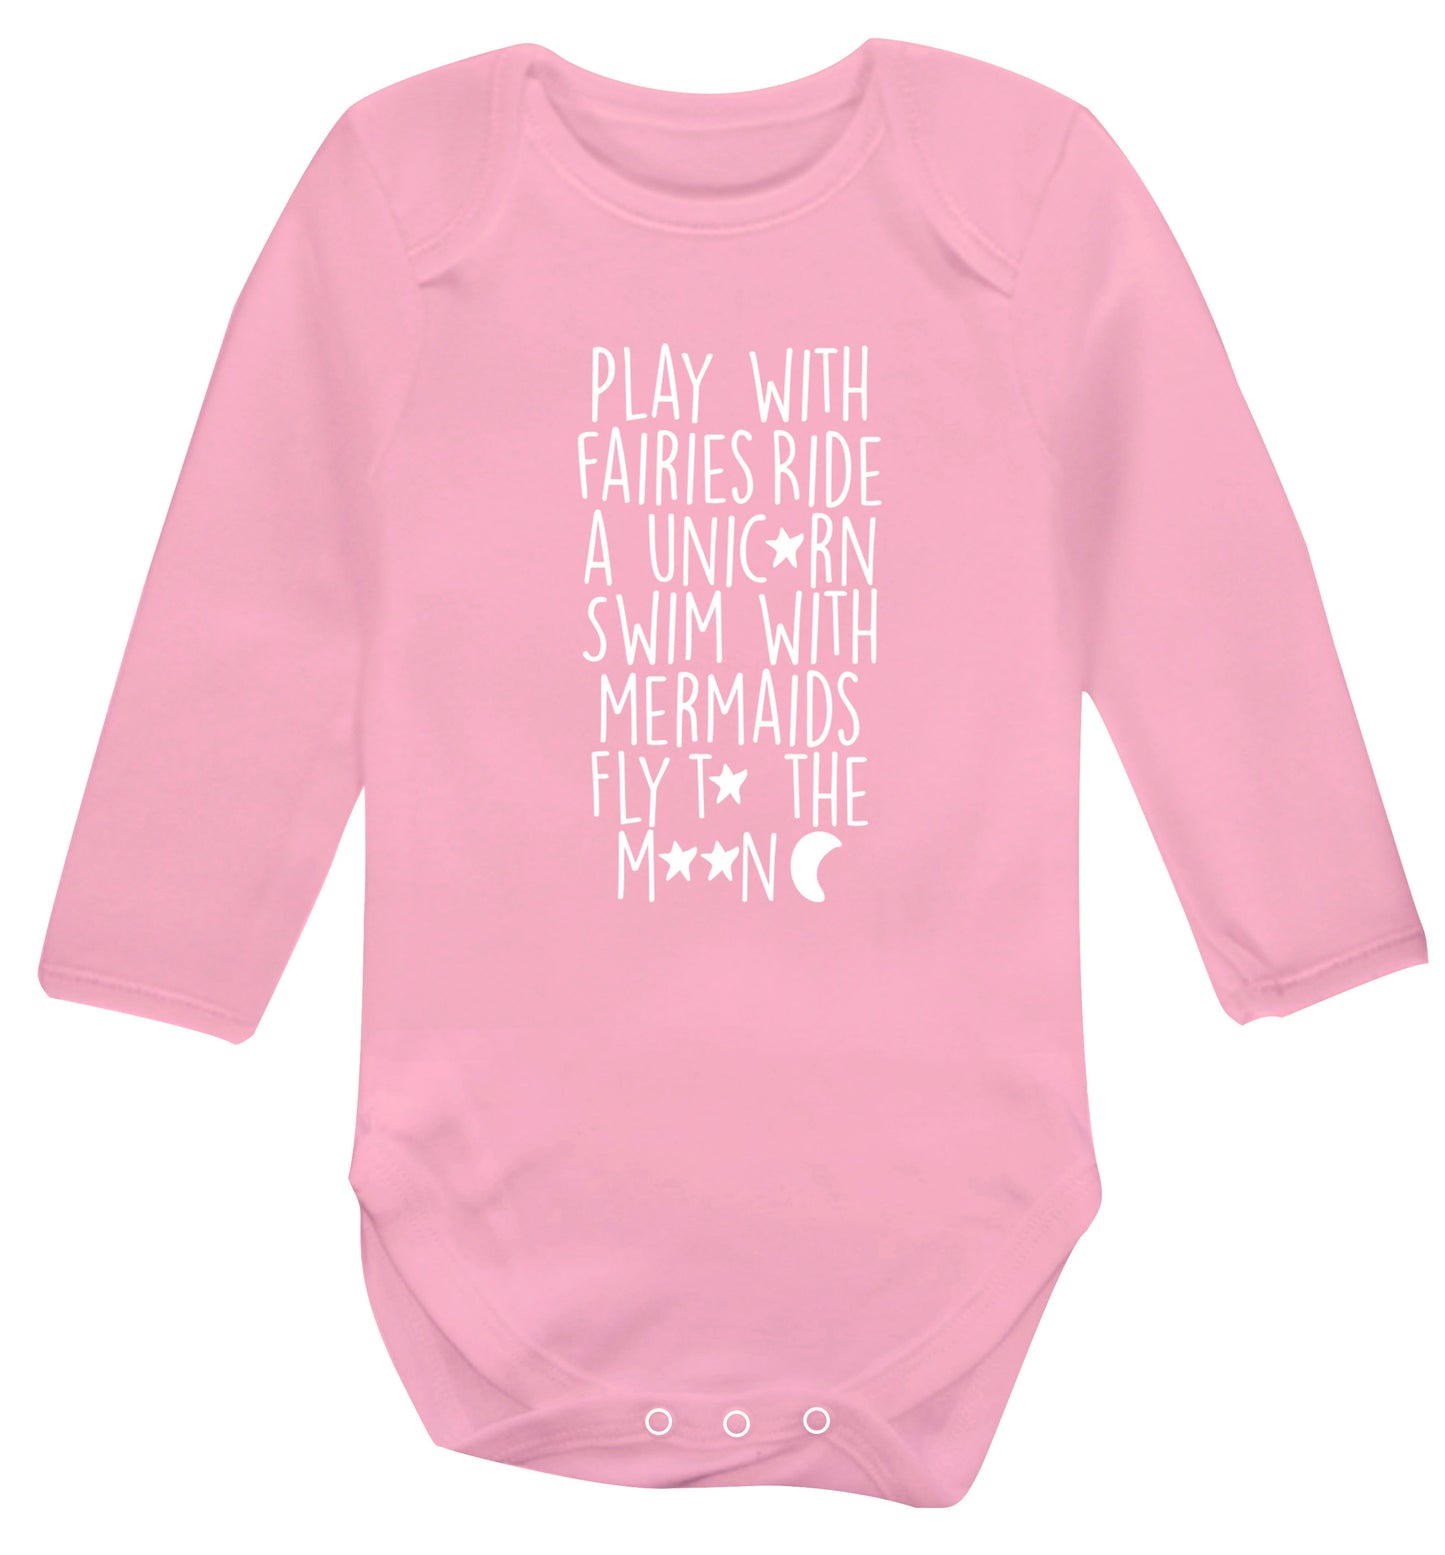 Play with fairies ride a unicorn swim with mermaids fly to the moon Baby Vest long sleeved pale pink 6-12 months